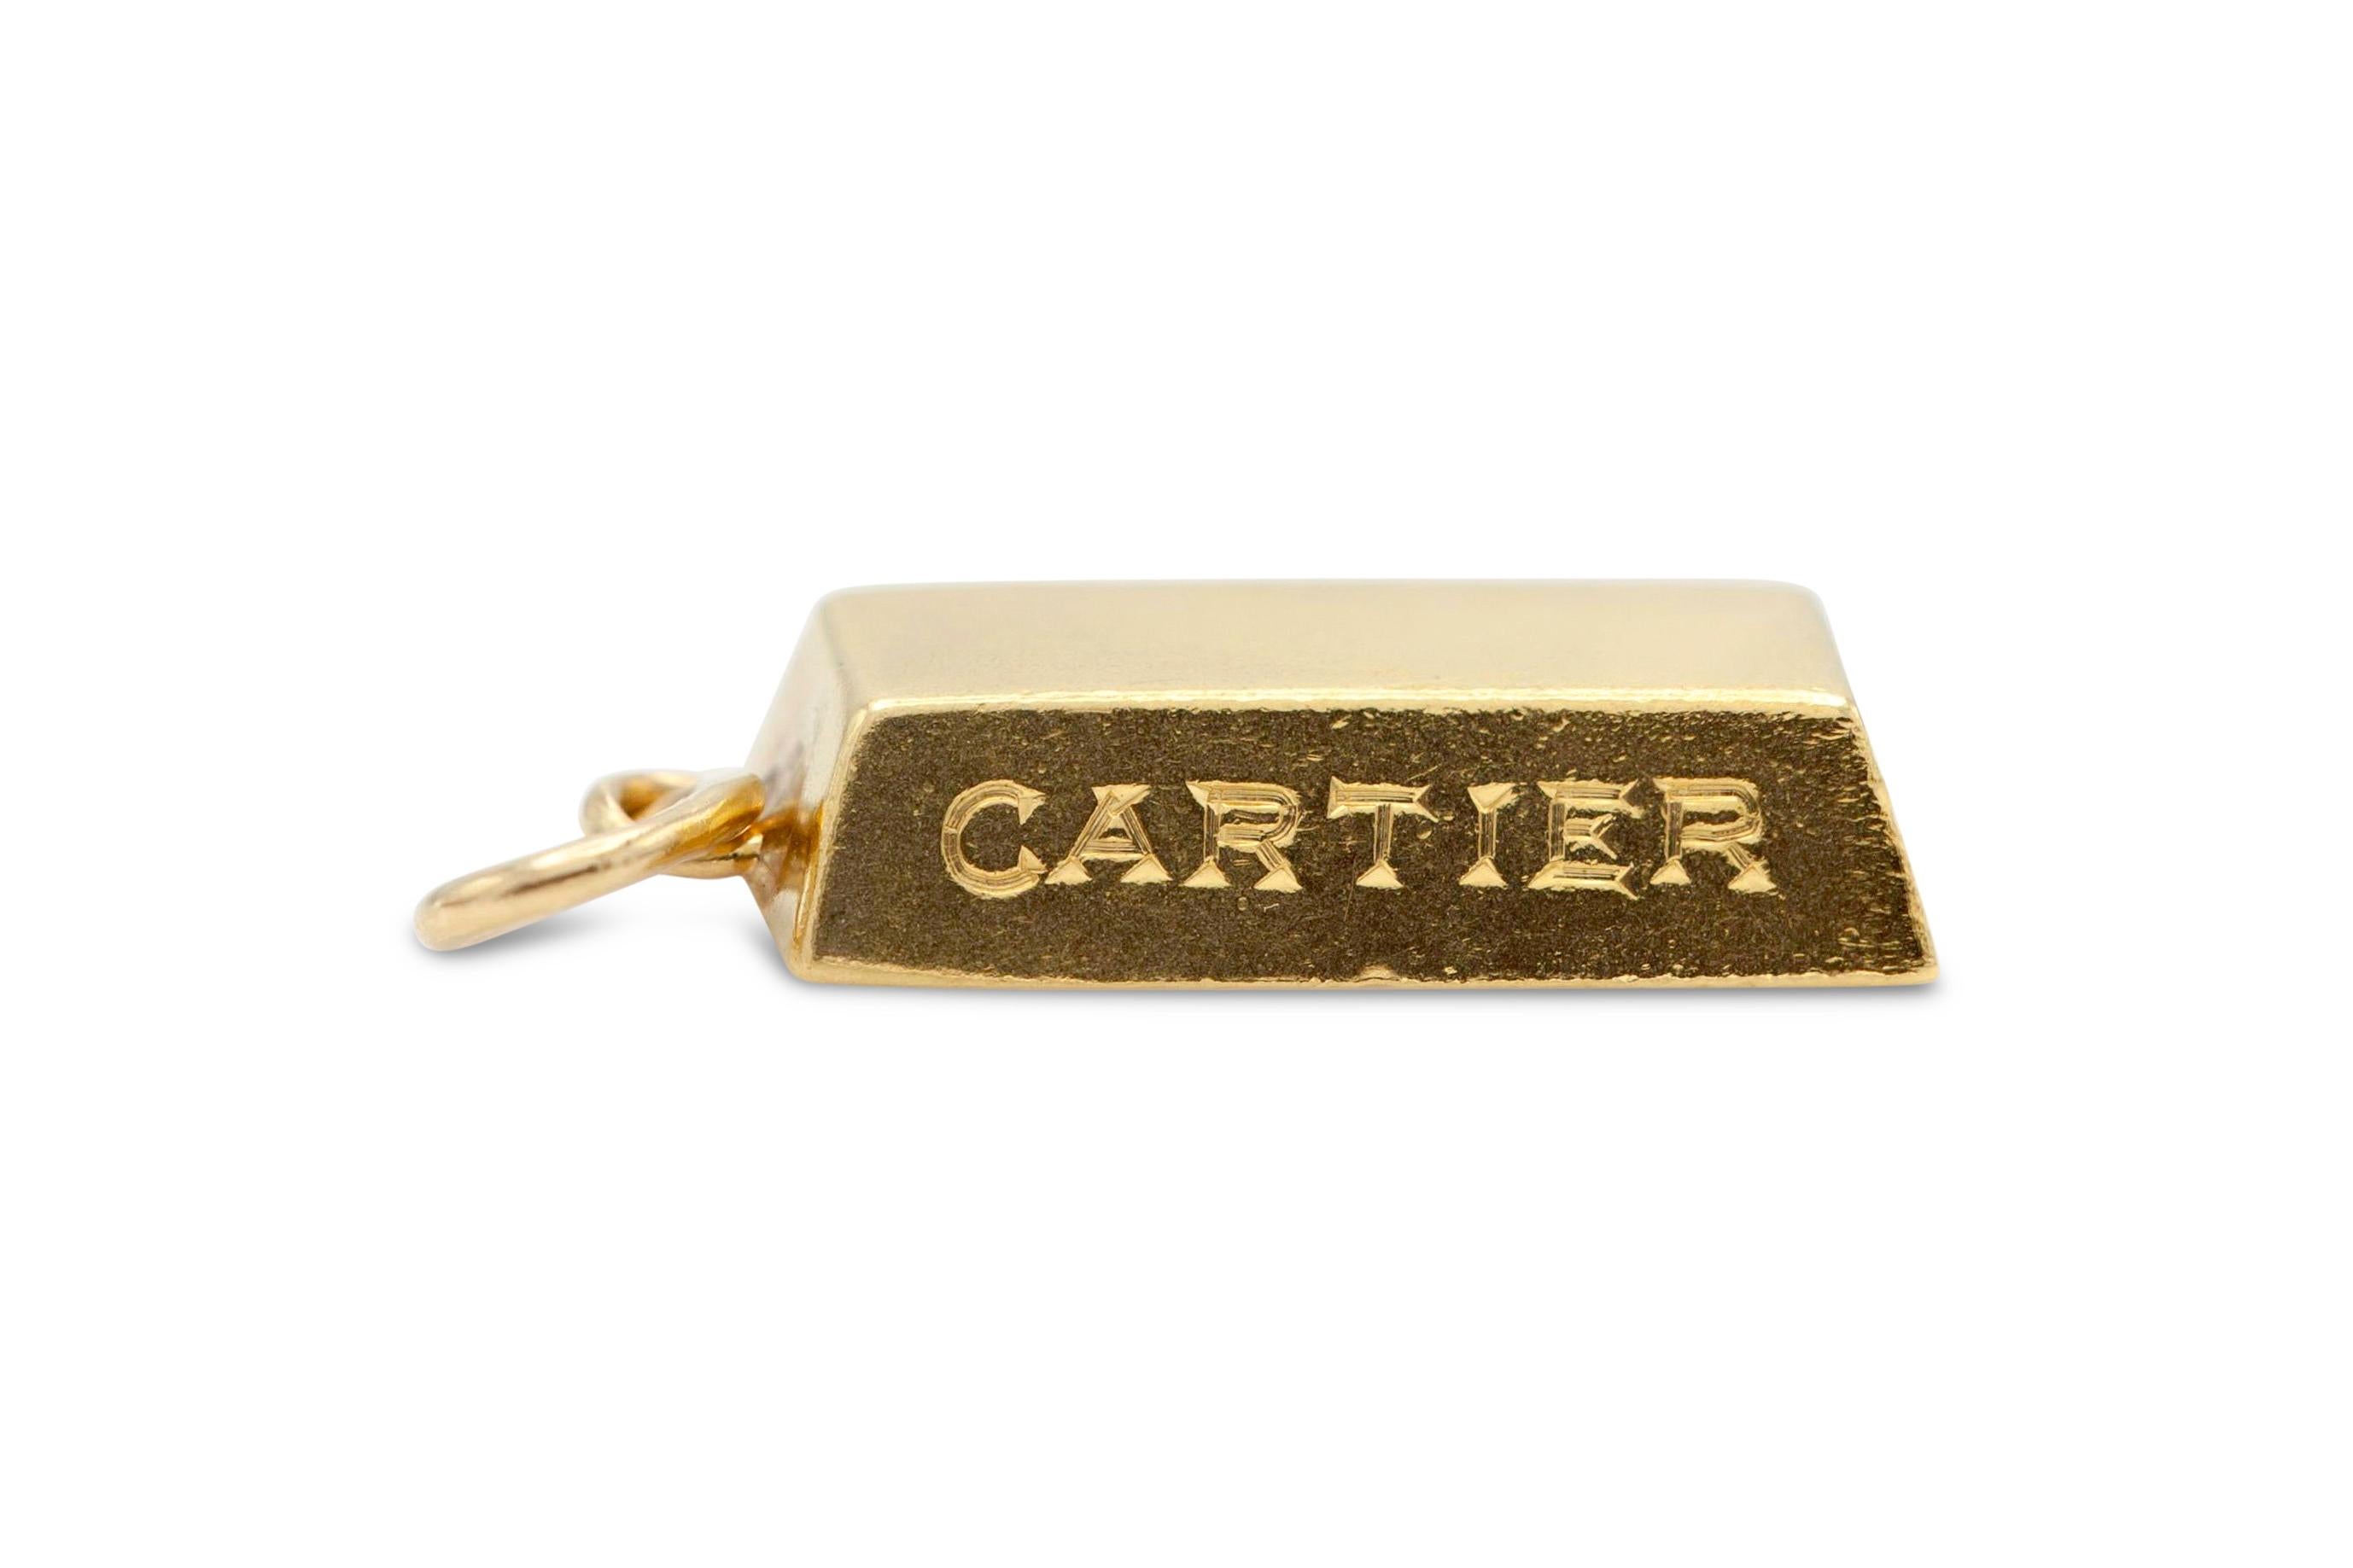 18K yellow gold bar weighing 1/4oz, wearable as a pendant. Signed Cartier. 